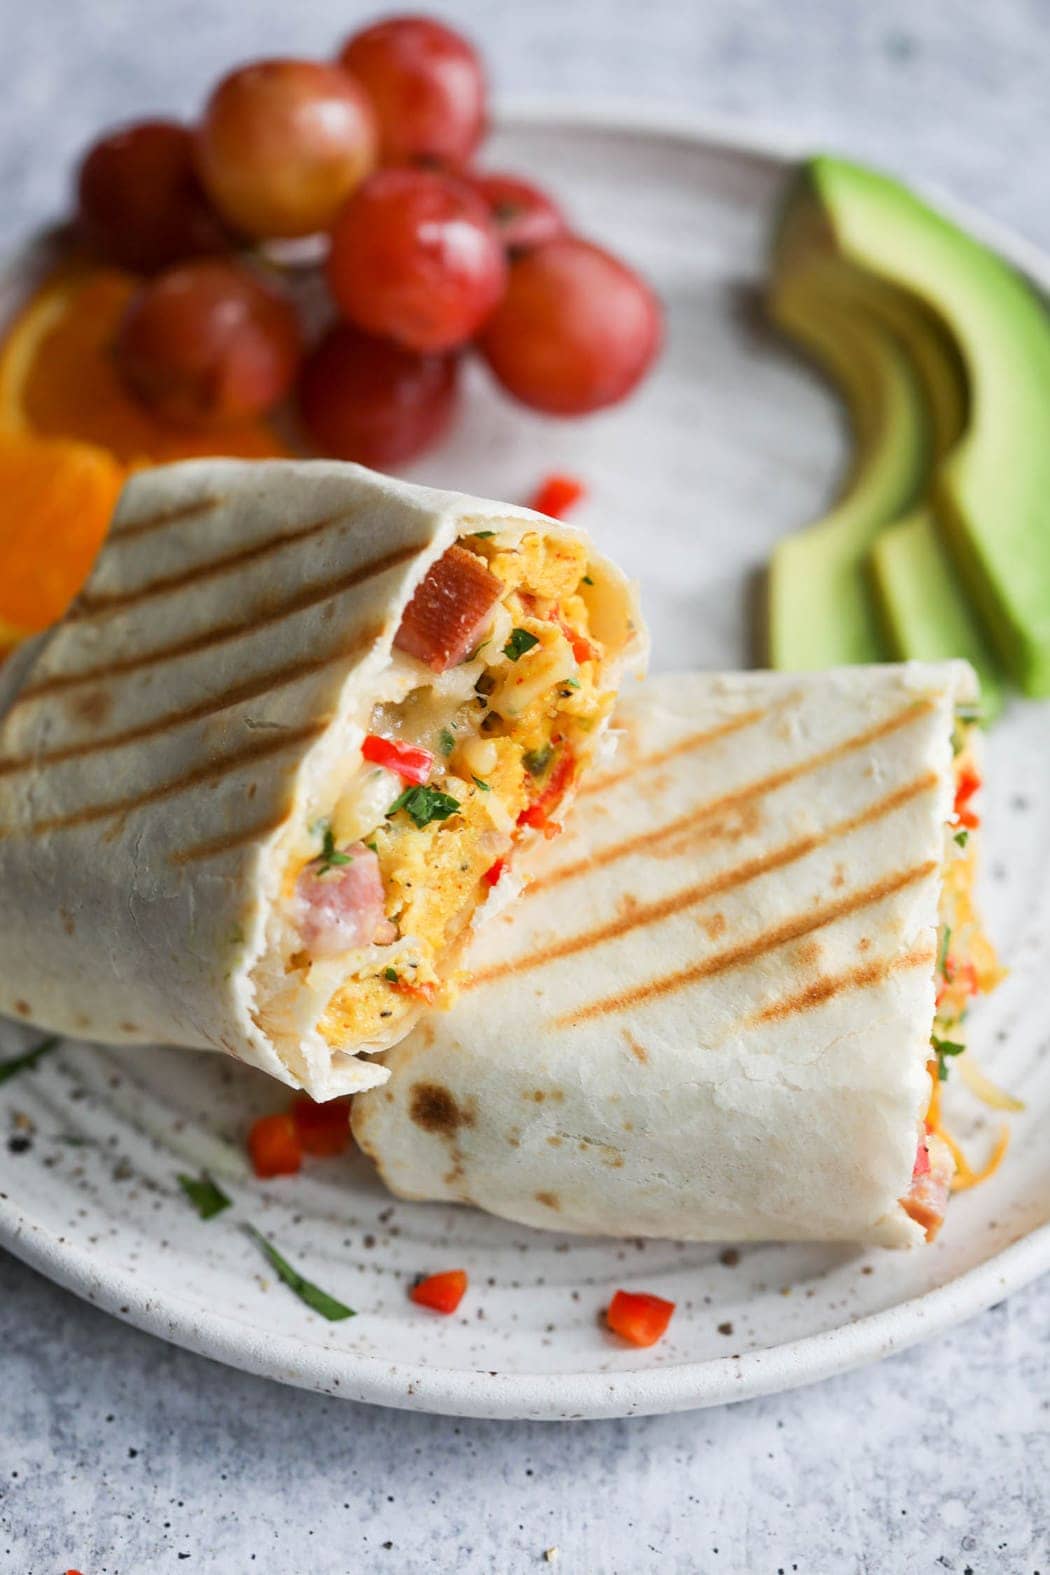 A breakfast burrito filled with scrambled eggs as part of 6 freezer breakfast recipes